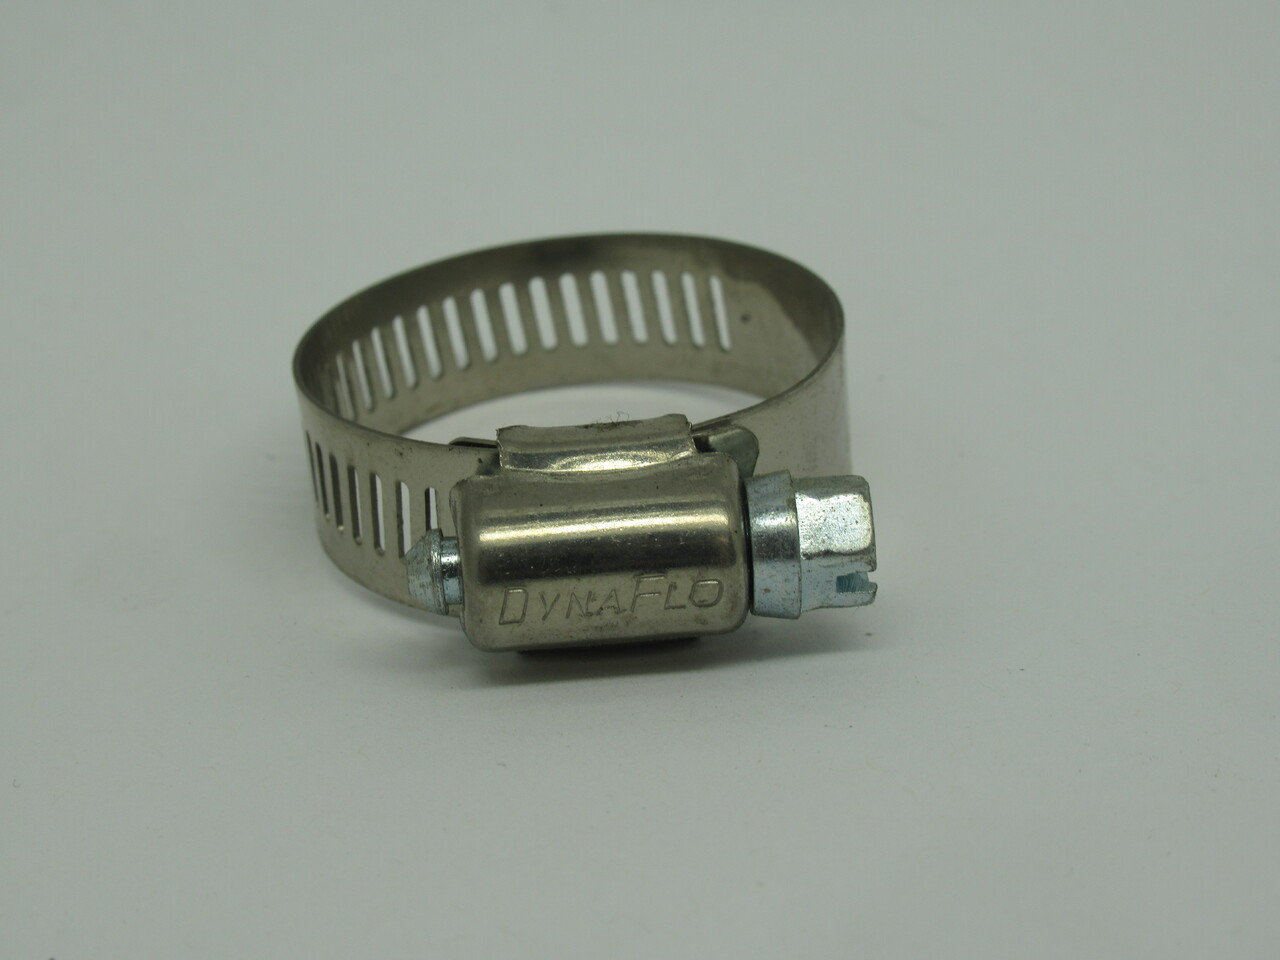 DynaFlo 18 1-1/2" Stainless Steel Worm Drive Clamp 17-38mm NOP